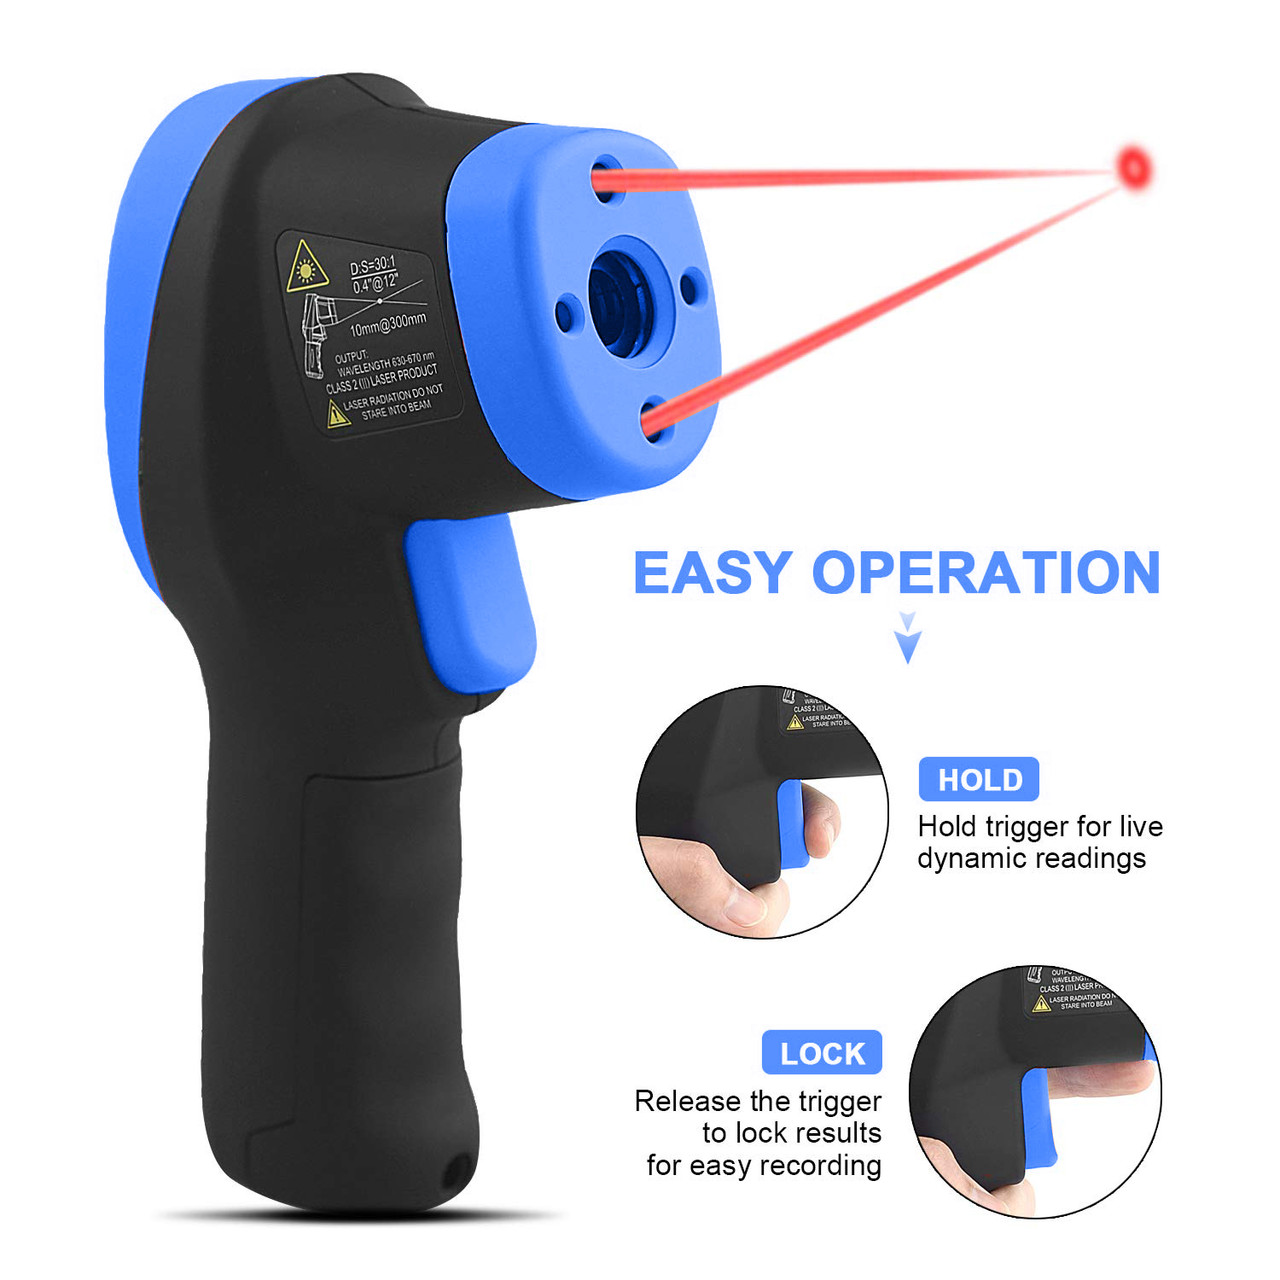 HoldPeak HP-980D-APP Infrared Thermometer High IR Laser With Bluetooth APP